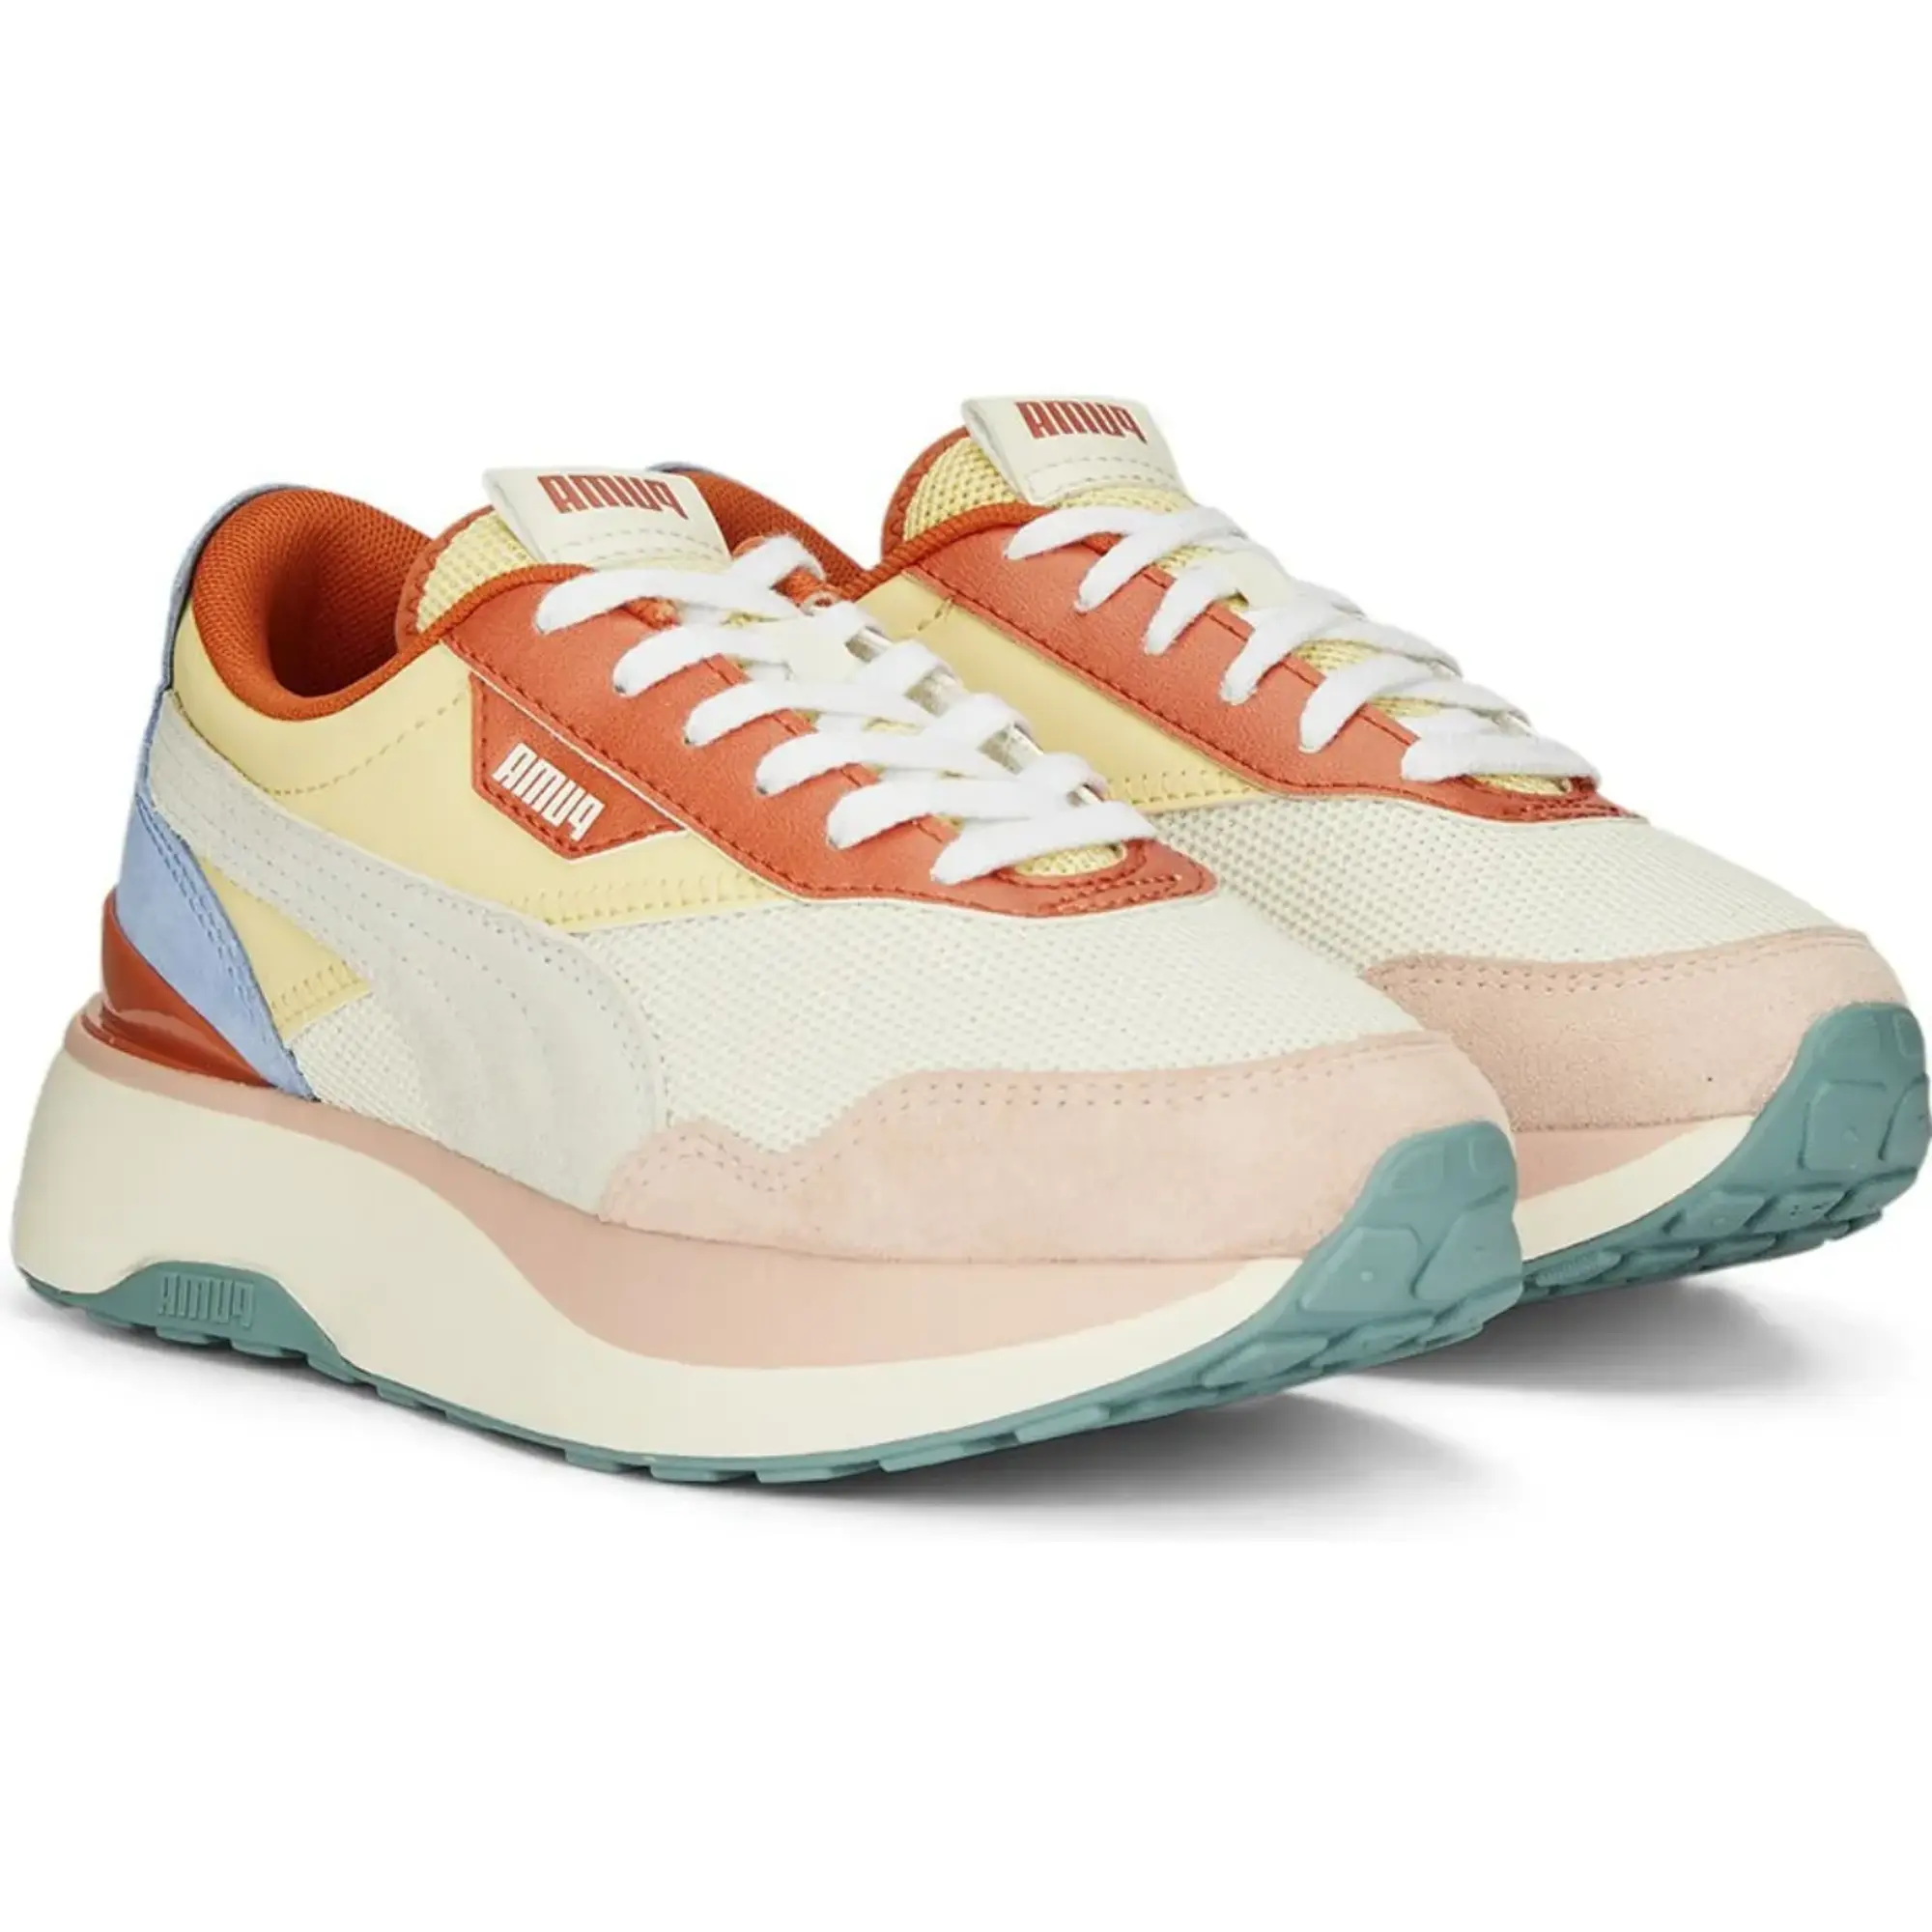 Puma Select Cruise Rider Candy Trainers  - Multicolor